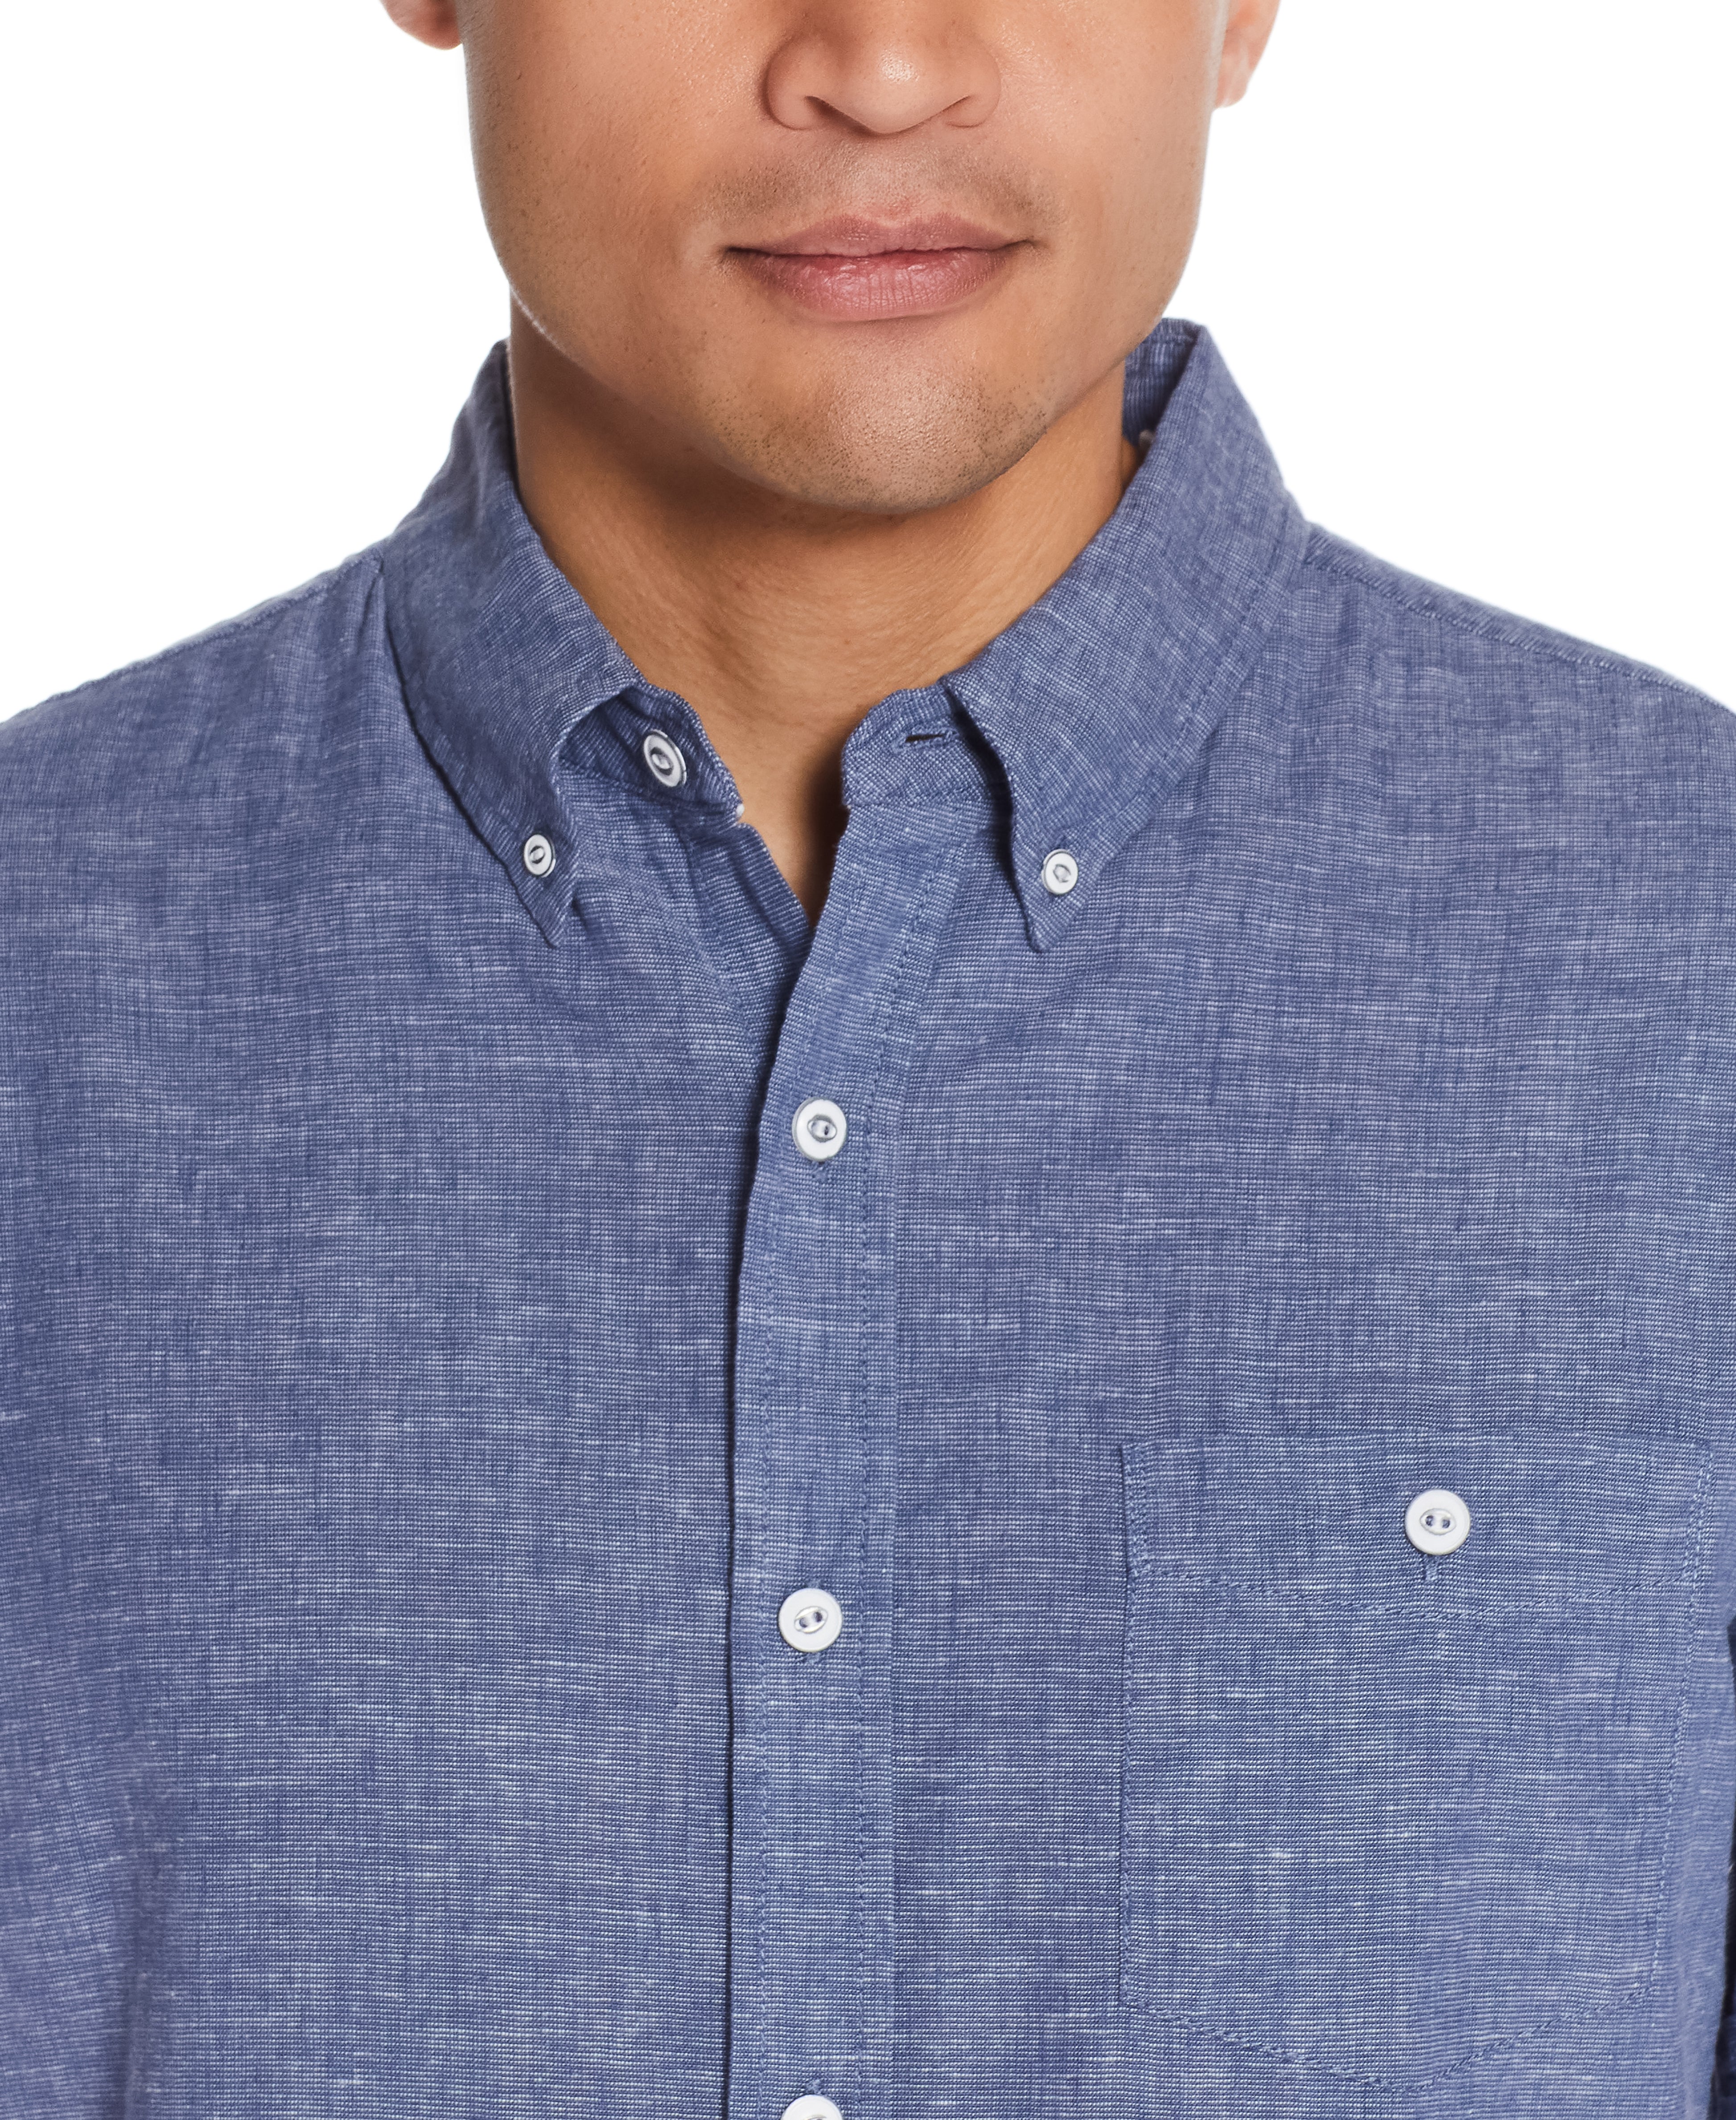 SHORT SLEEVE SOLID LINEN COTTON in ENSIGN BLUE